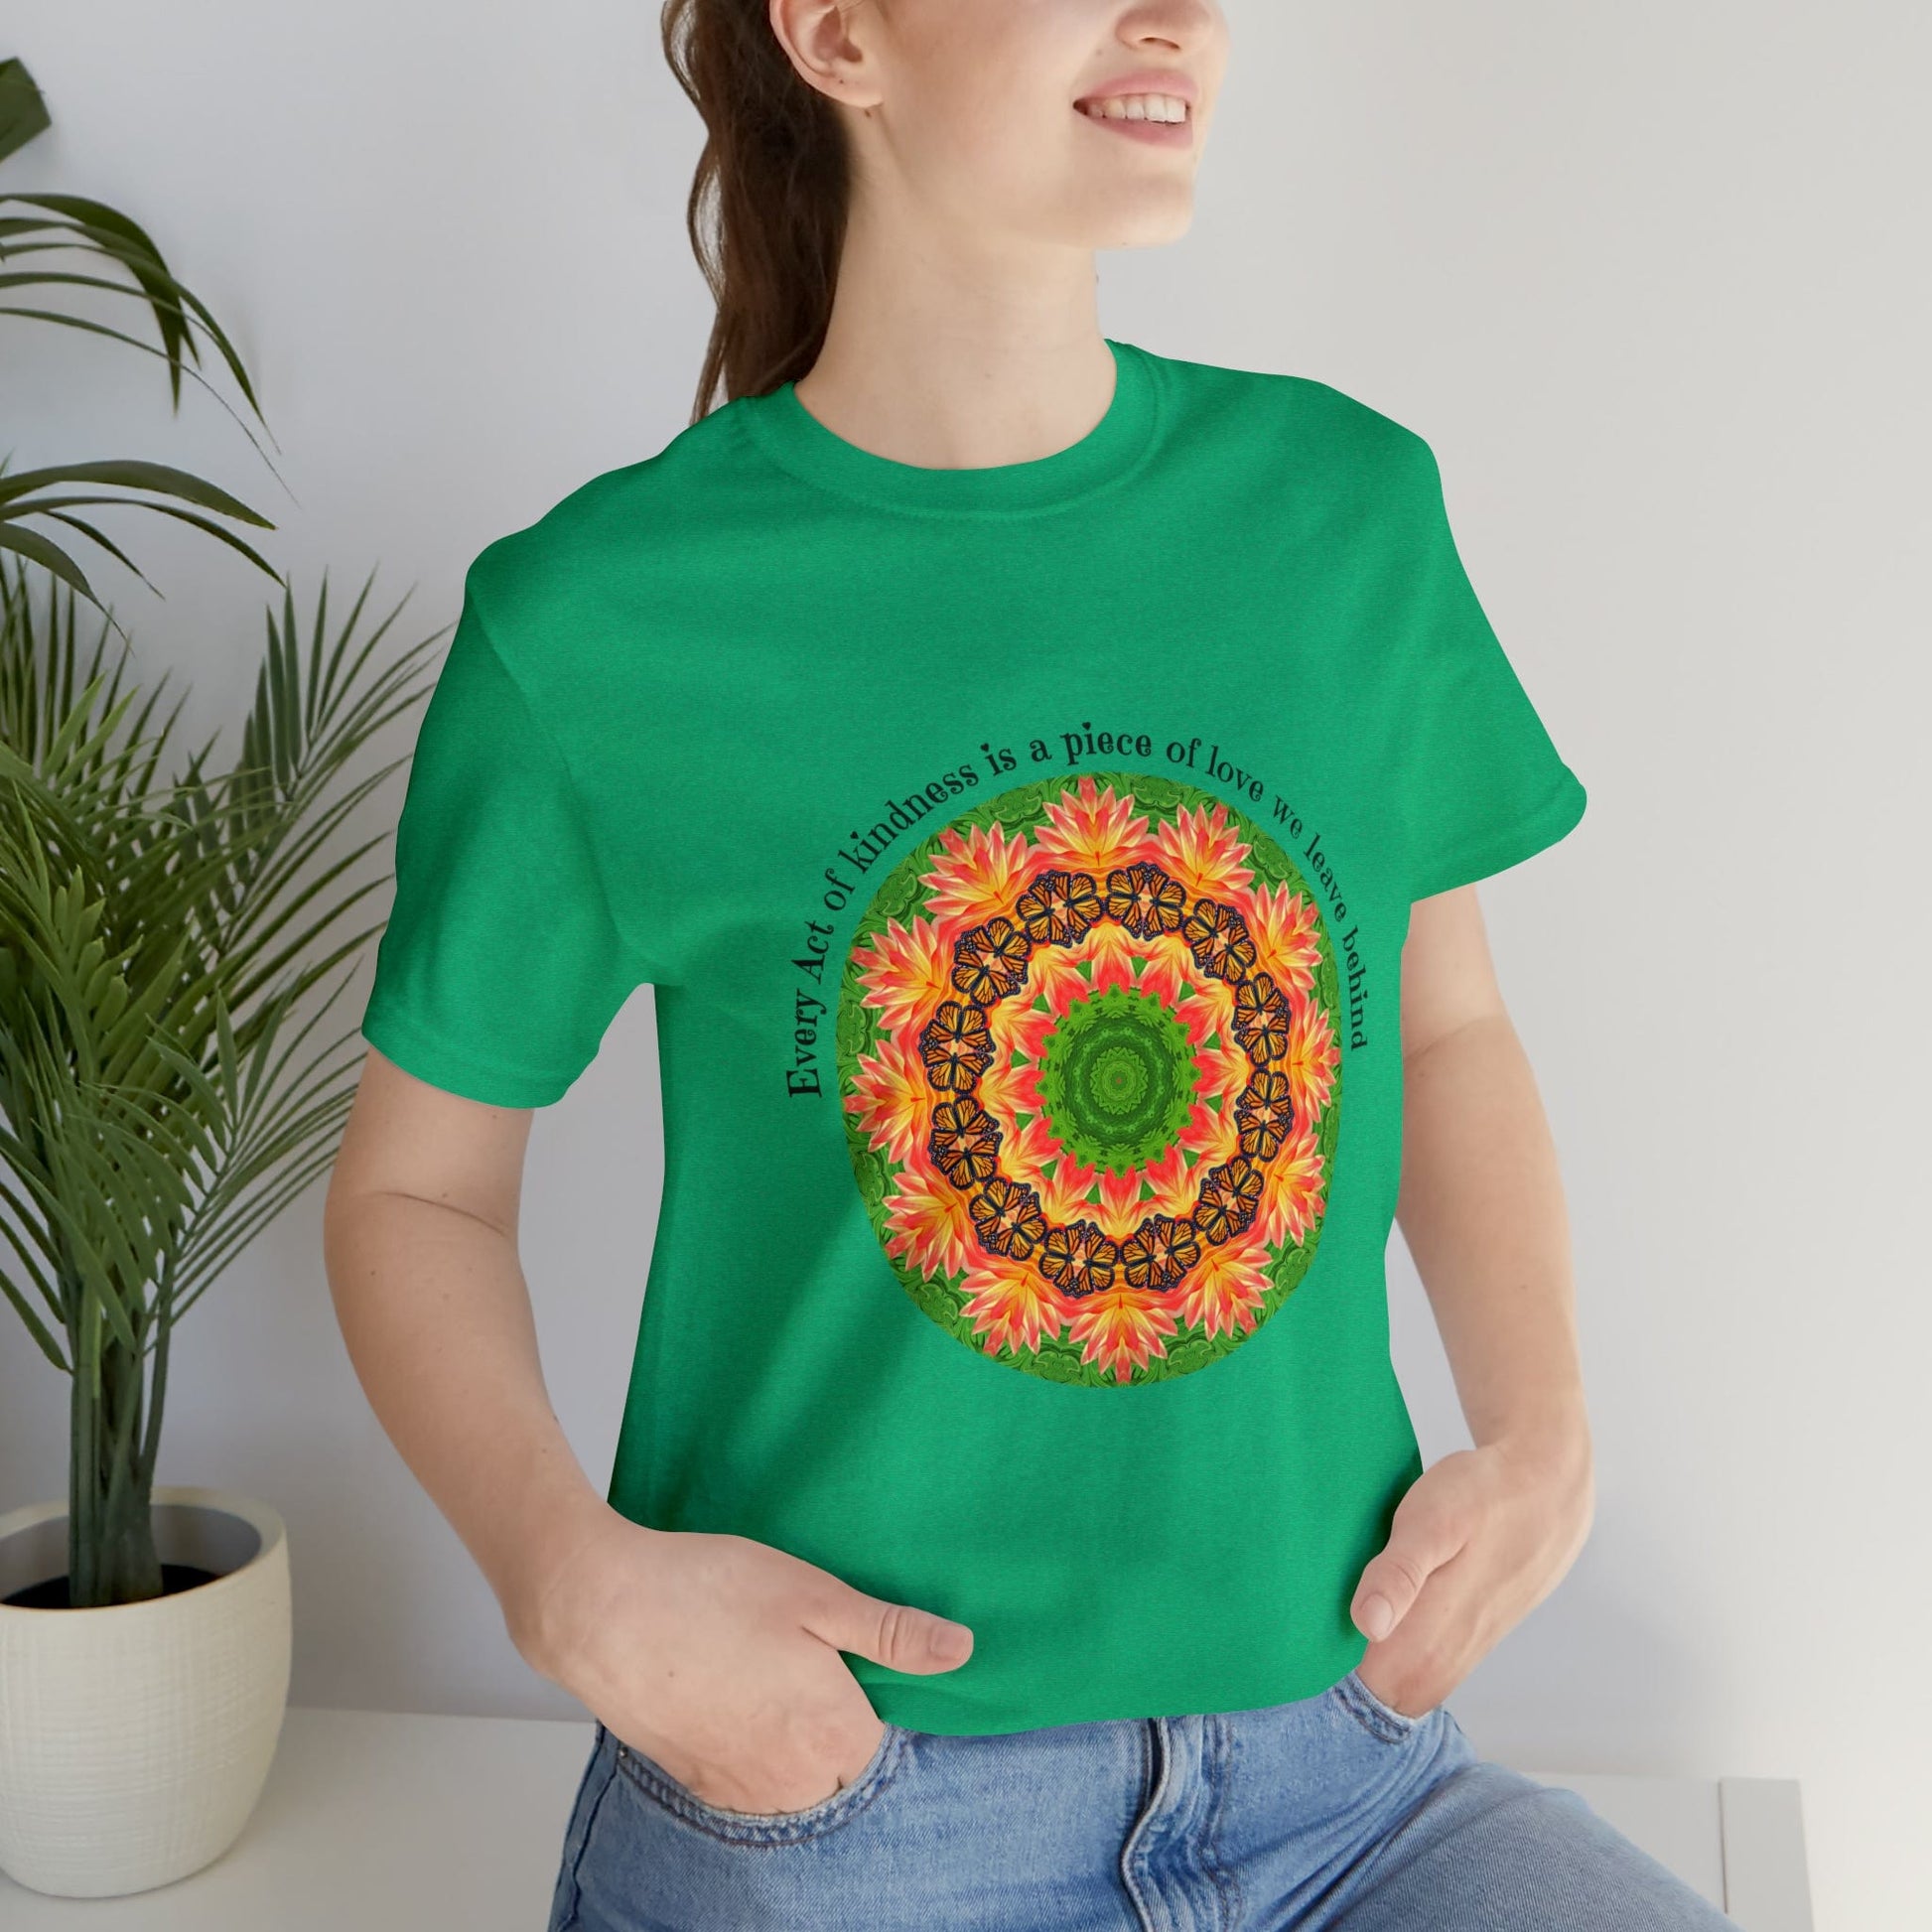 Beautiful Butterfly Mandala Art Graphic Tee Shirt - Cottagecore Clothing A Nature Lovers Delight Ornate Orbit heather kelly